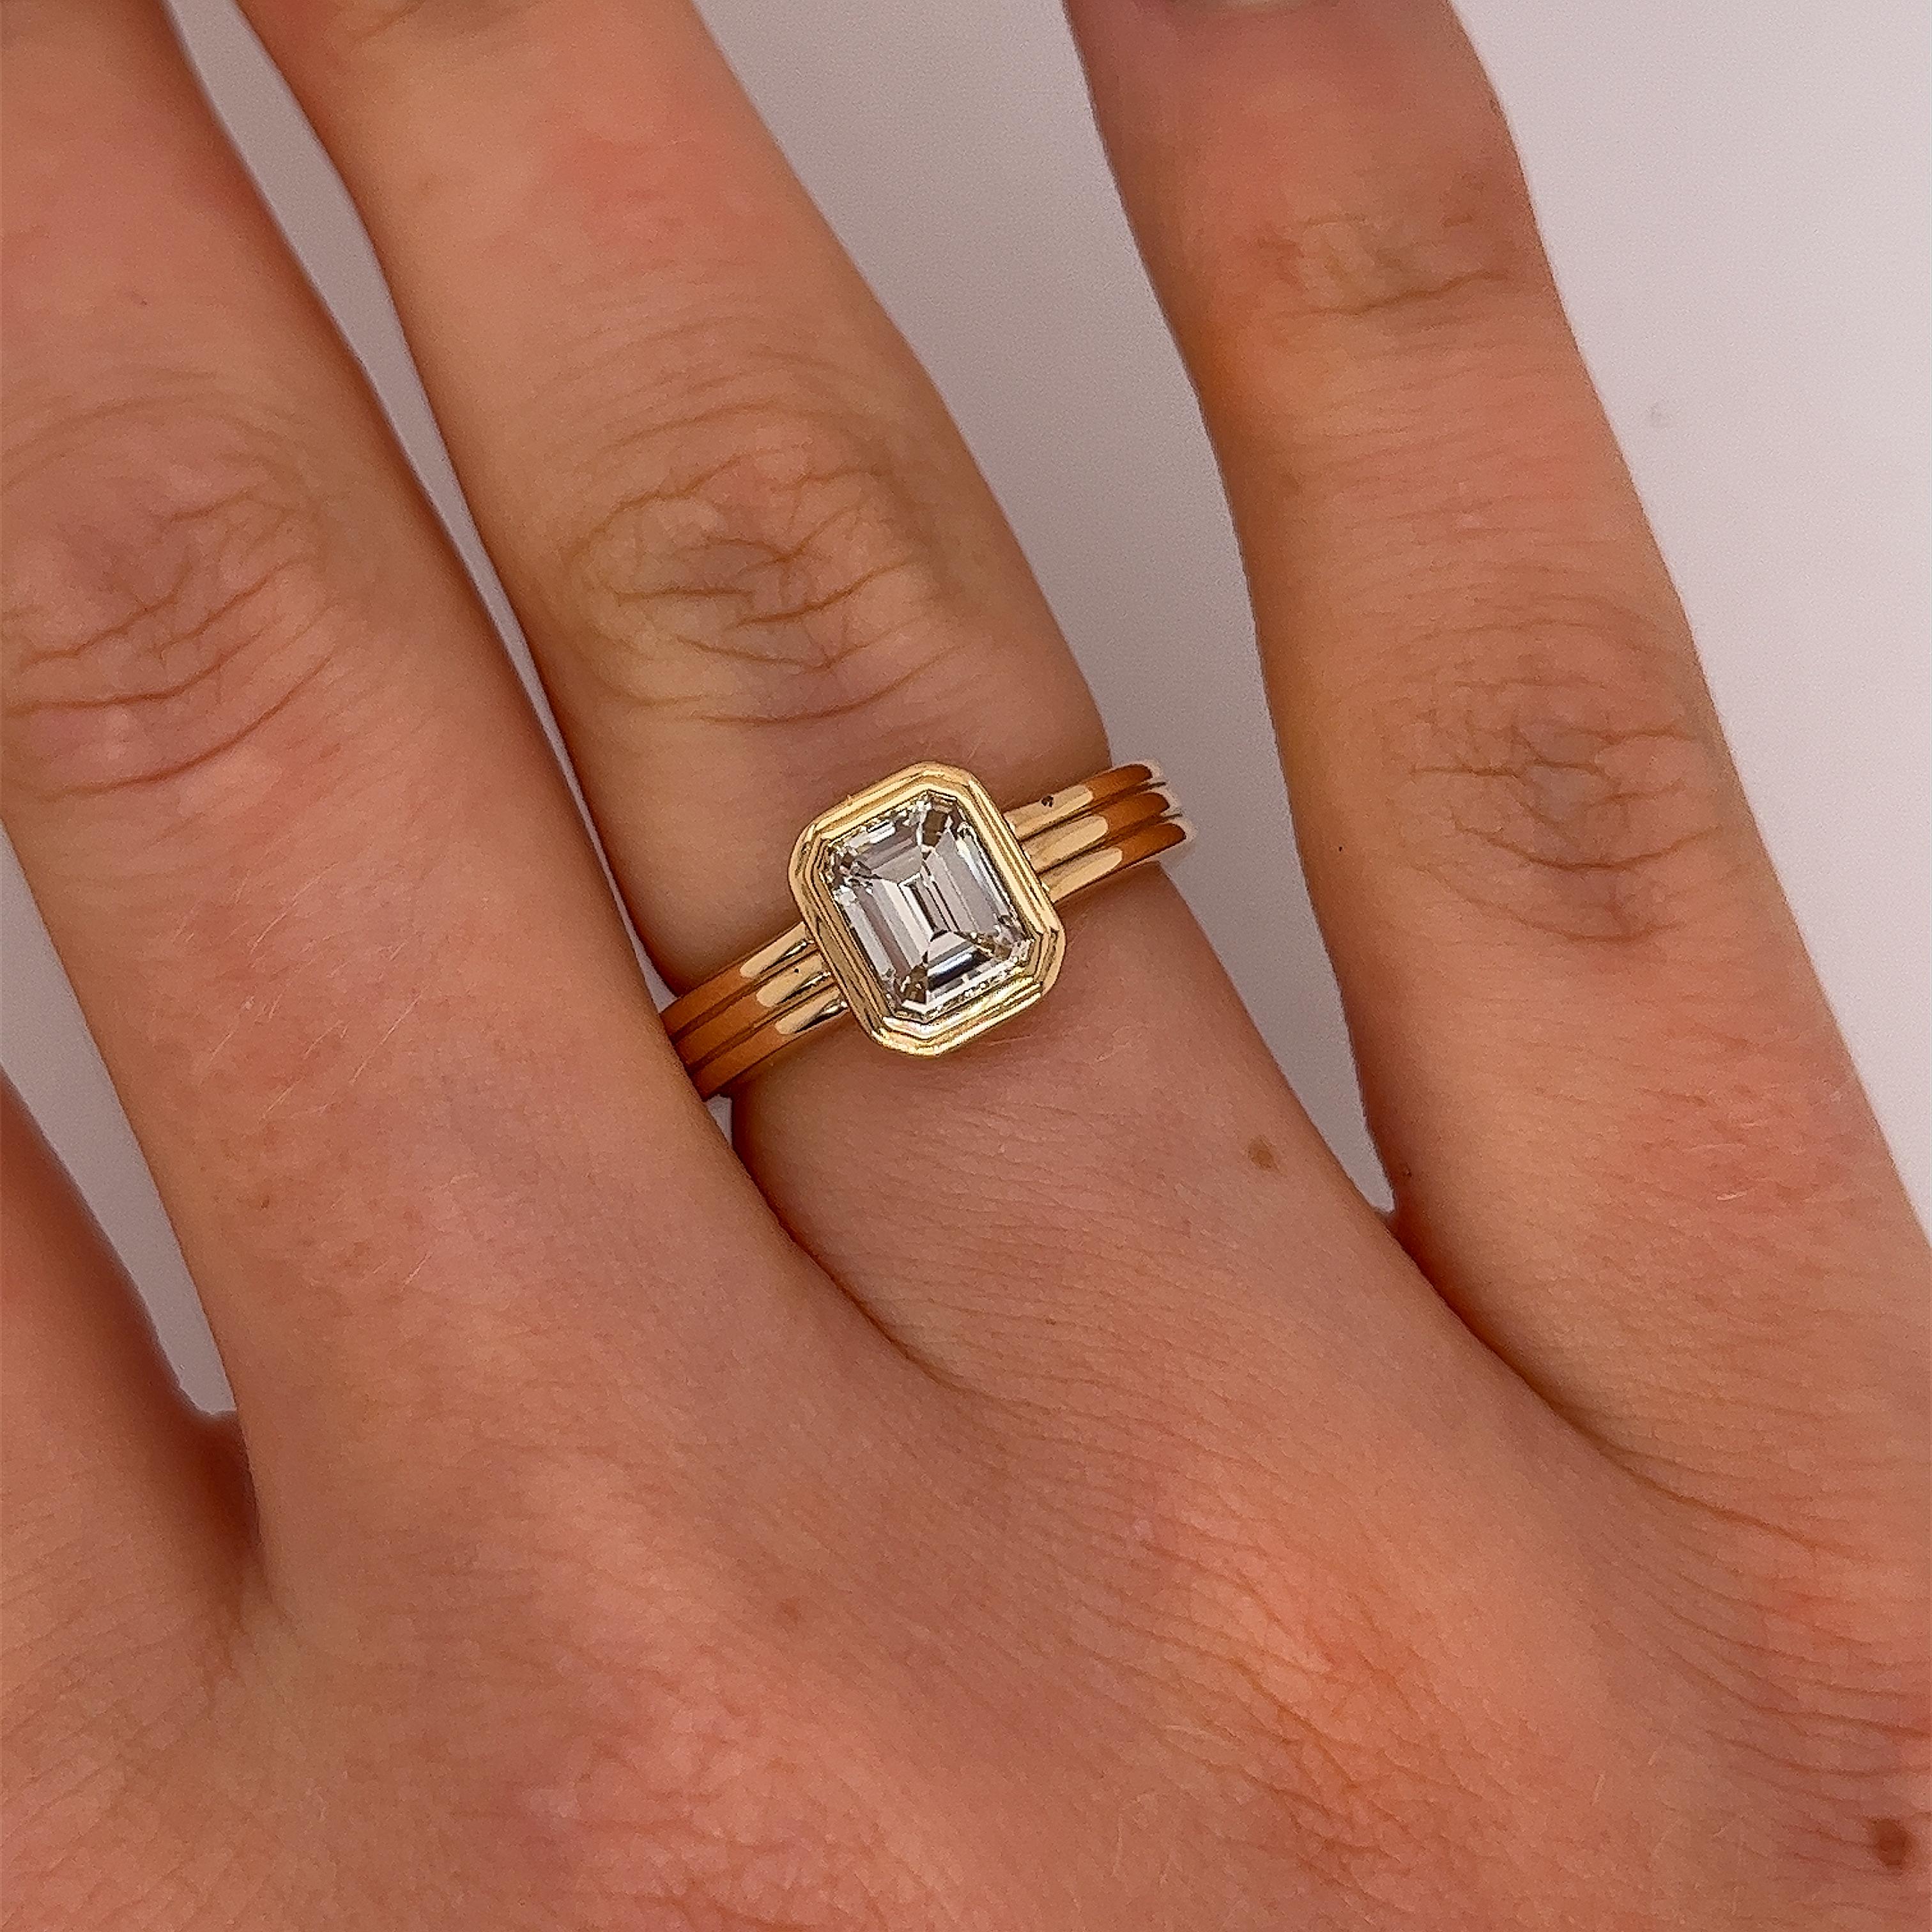 Diamond Solitaire Ring Set With 1.01ct K/VS2 Emerald Cut Diamond, In 18ct Gold For Sale 4